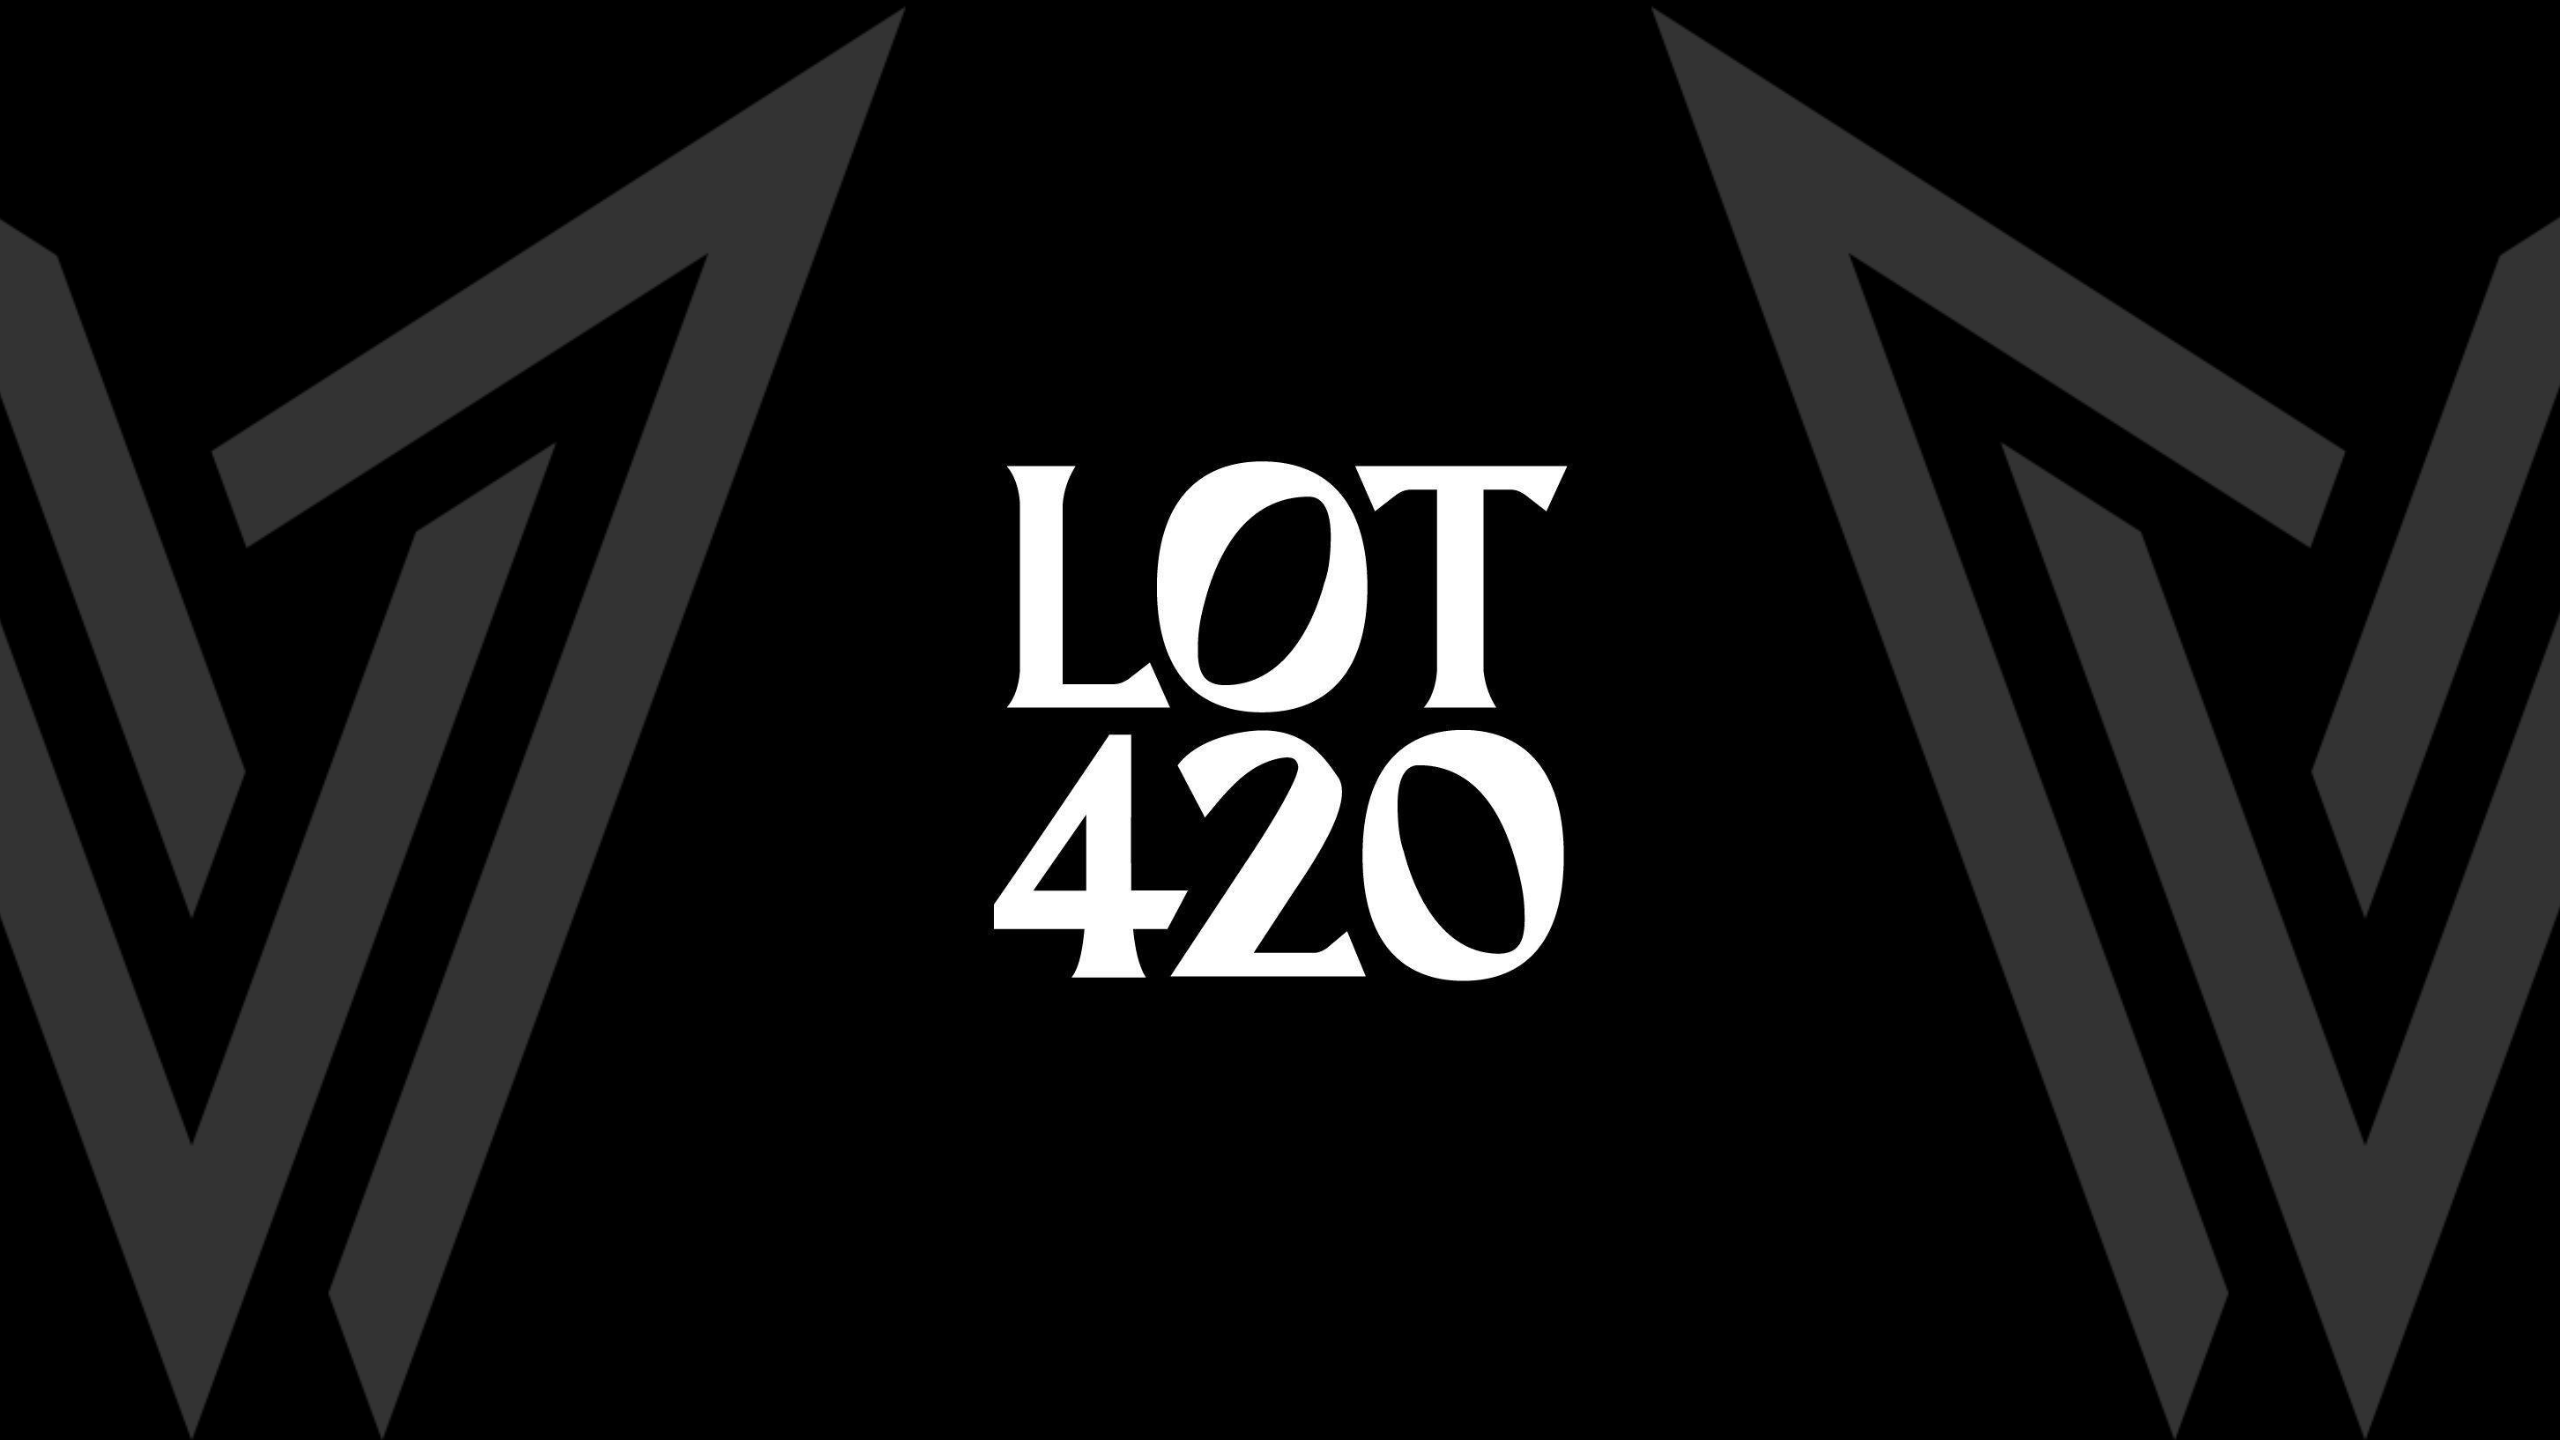 Indulge in the epitome of cannabis craftsmanship with LOT 420, Ashario Cannabis's exclusive collection of premium craft flower.